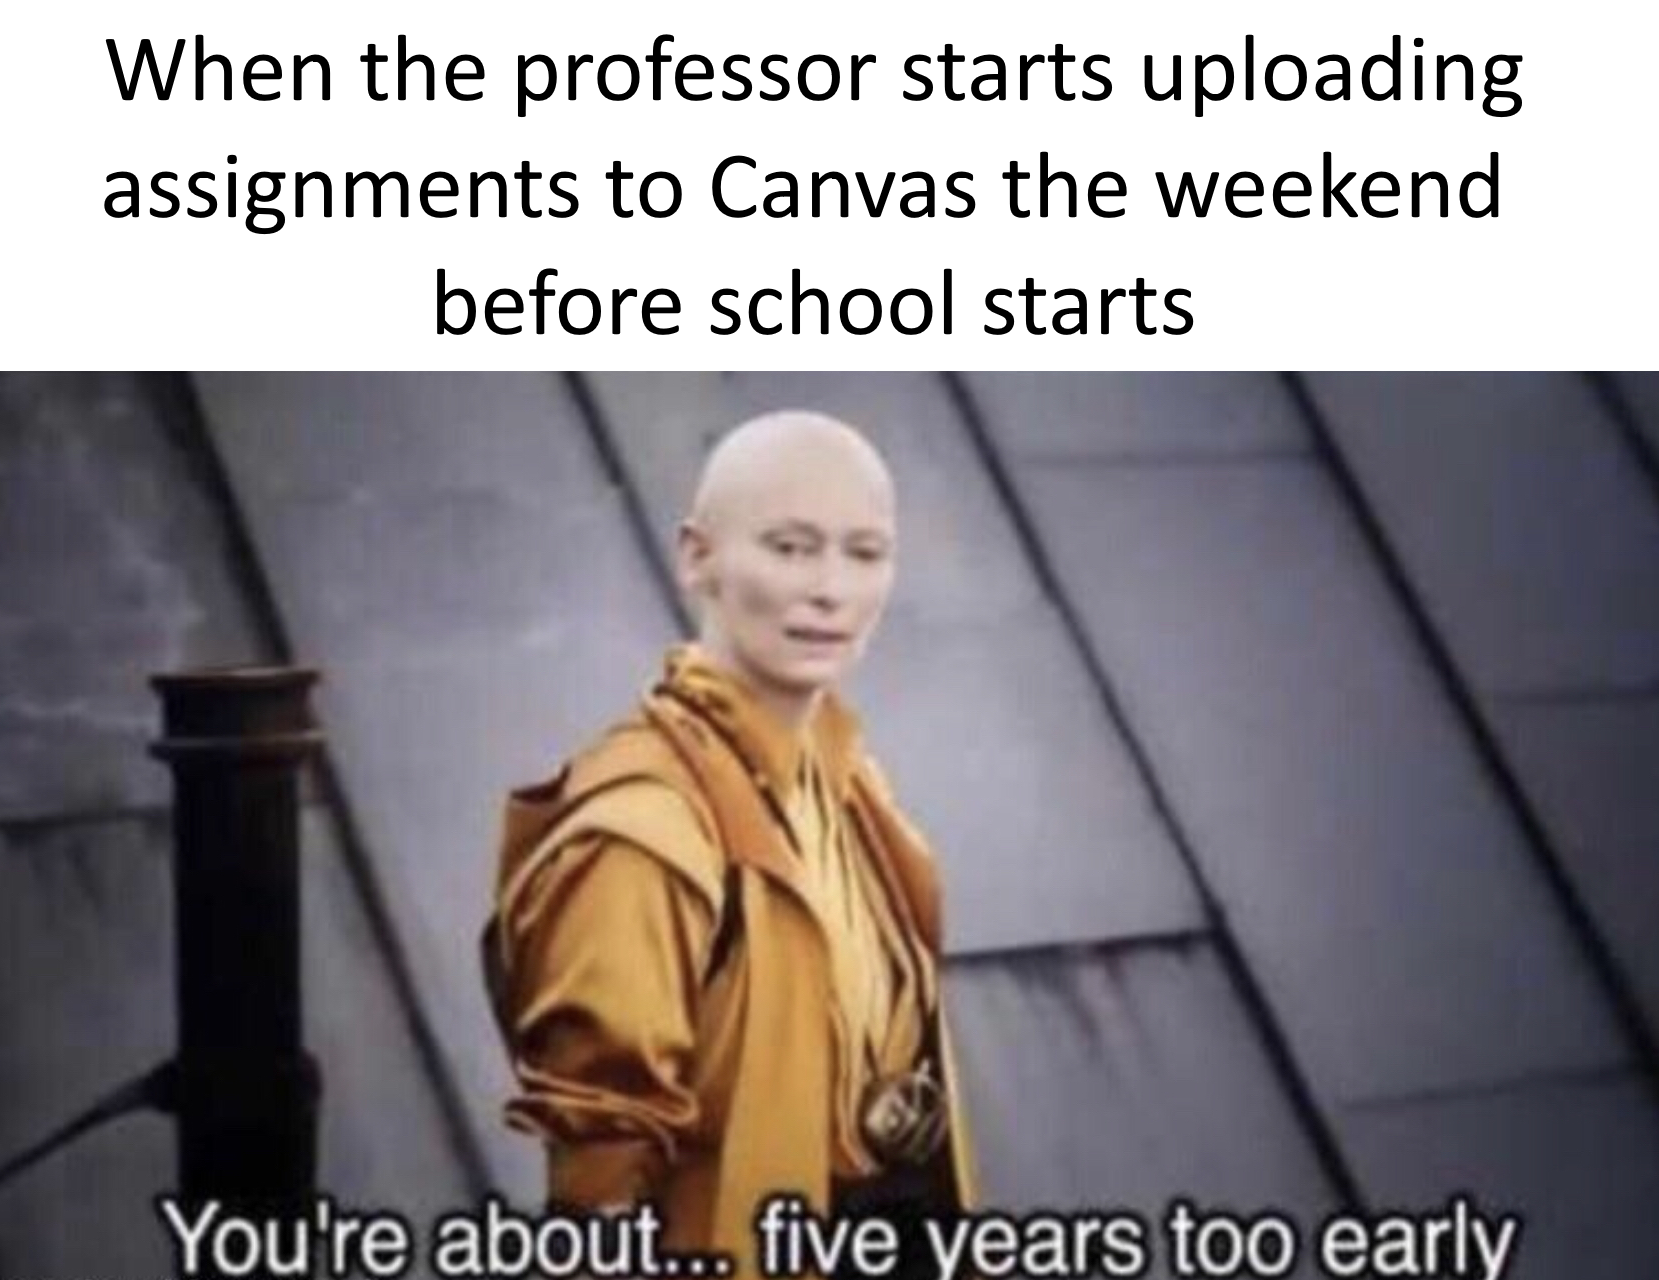 r/collegememes- college dank memes - you re about five years too early - When the professor starts uploading assignments to Canvas the weekend before school starts You're about... five years too early